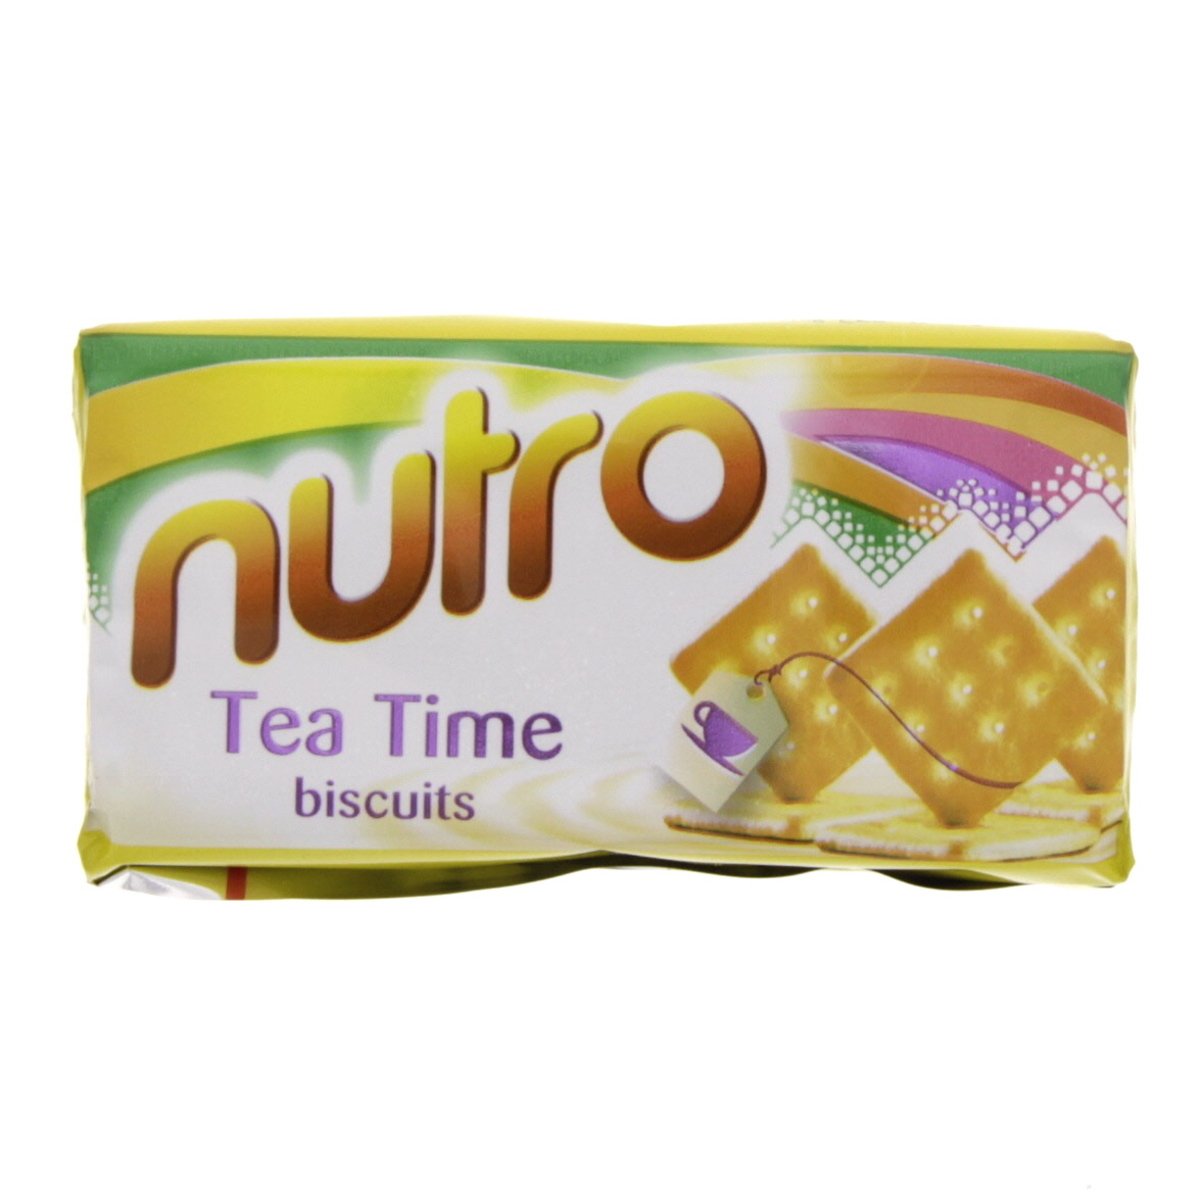 Nutro Tea Time Biscuits 45g x 12 Pieces